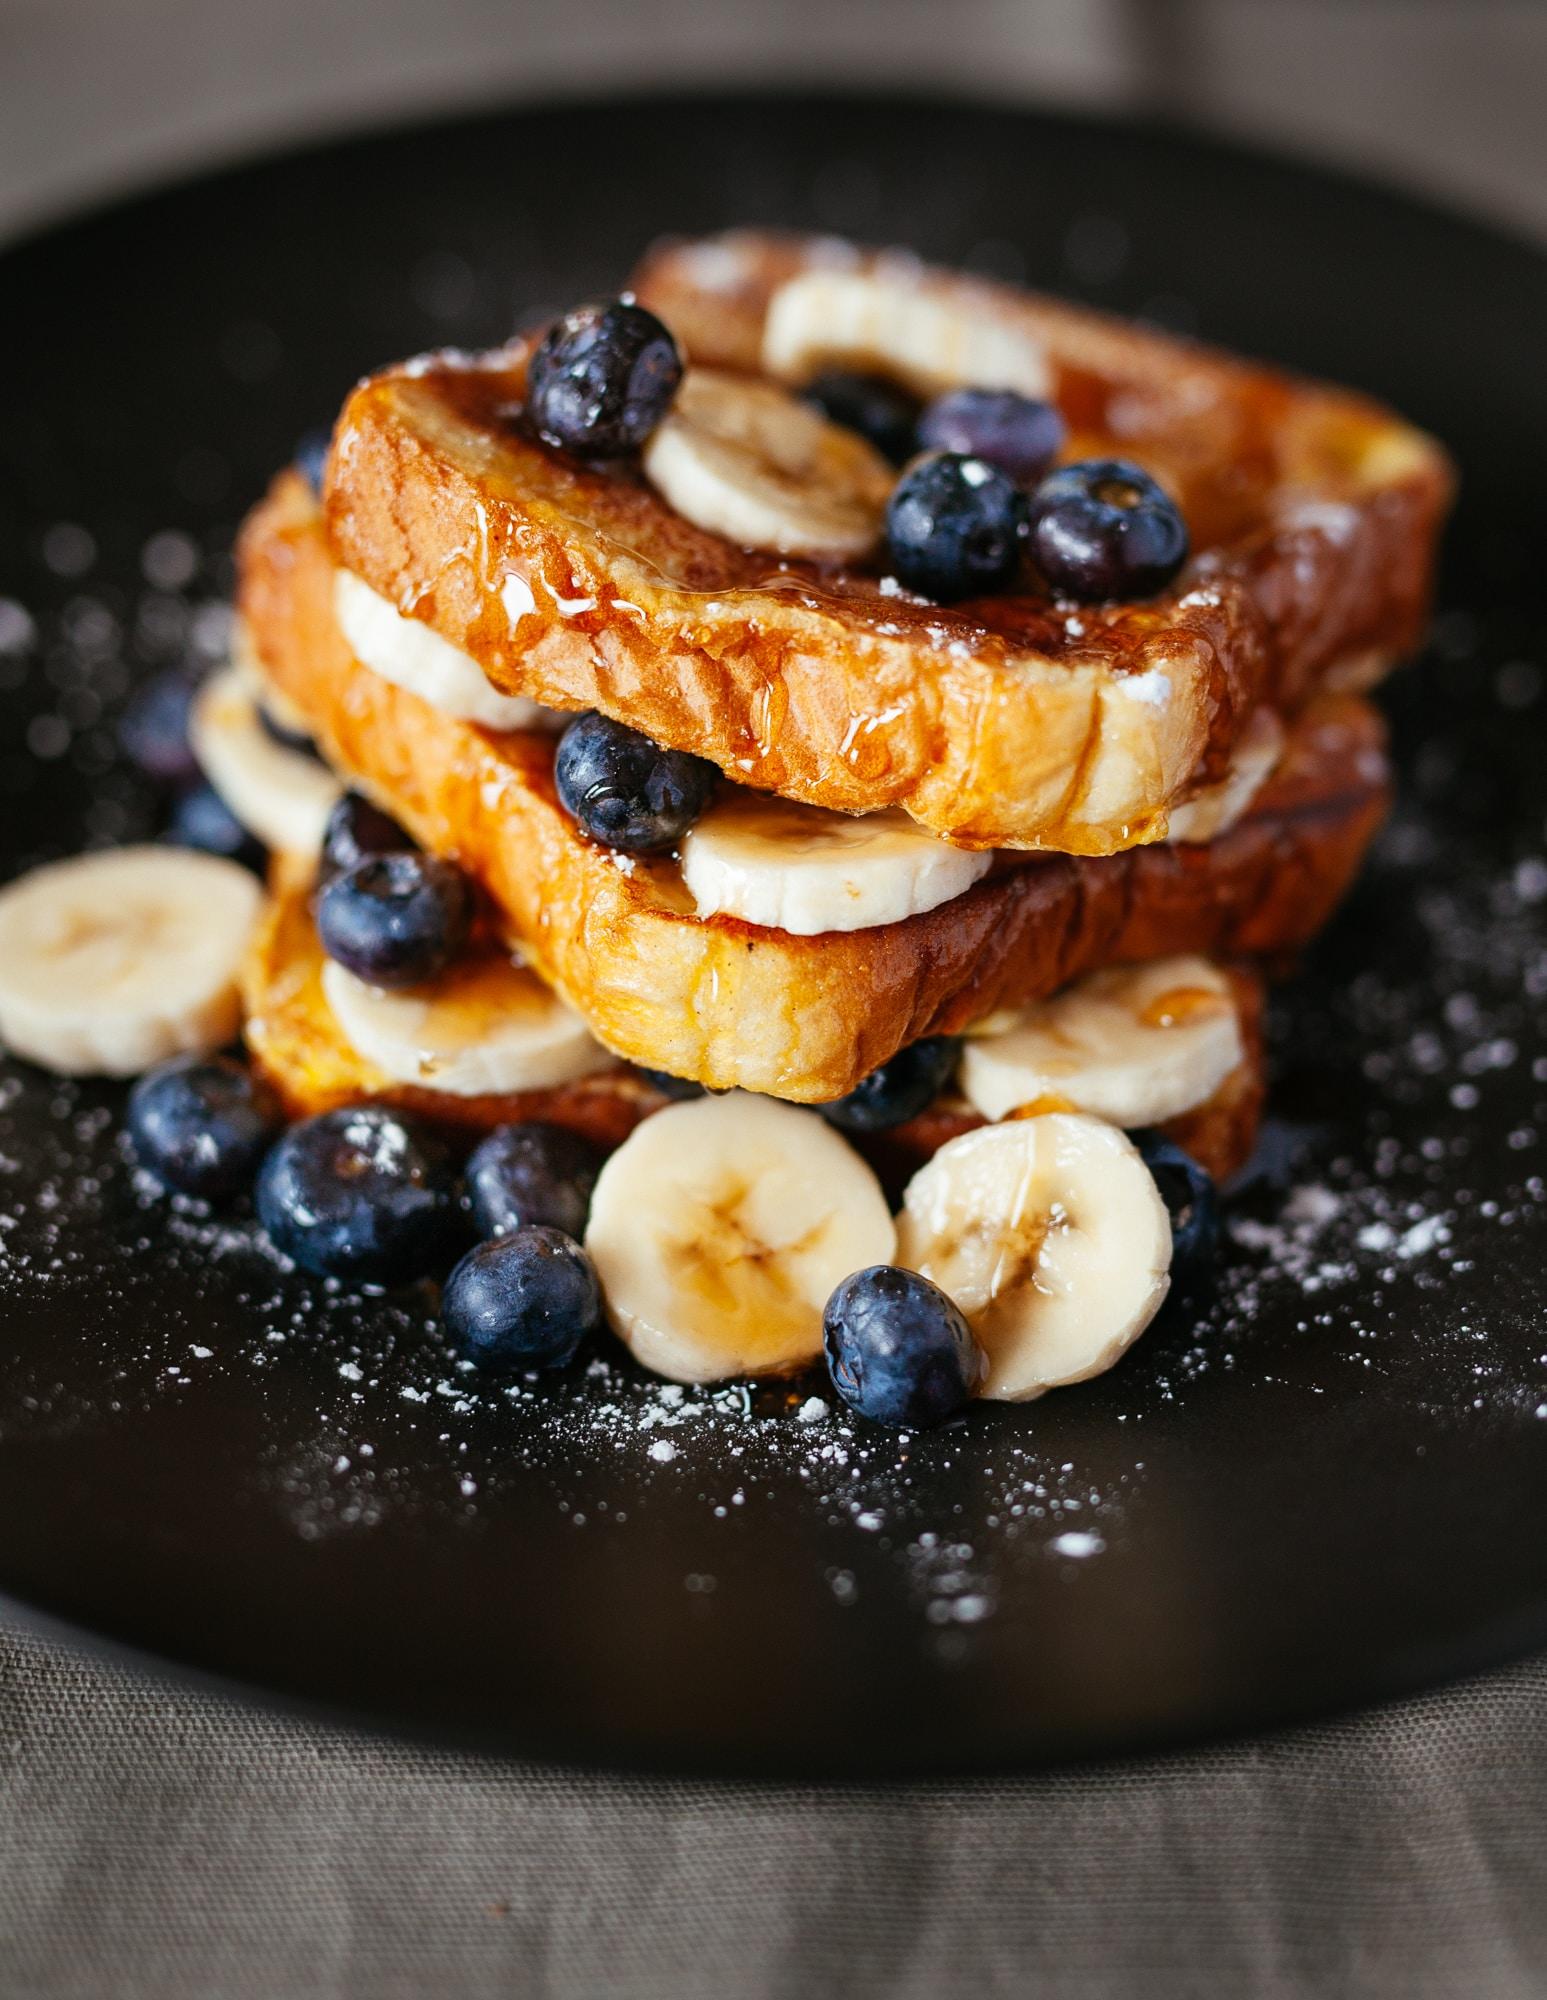 Pumpkin French toast with berries and bananas